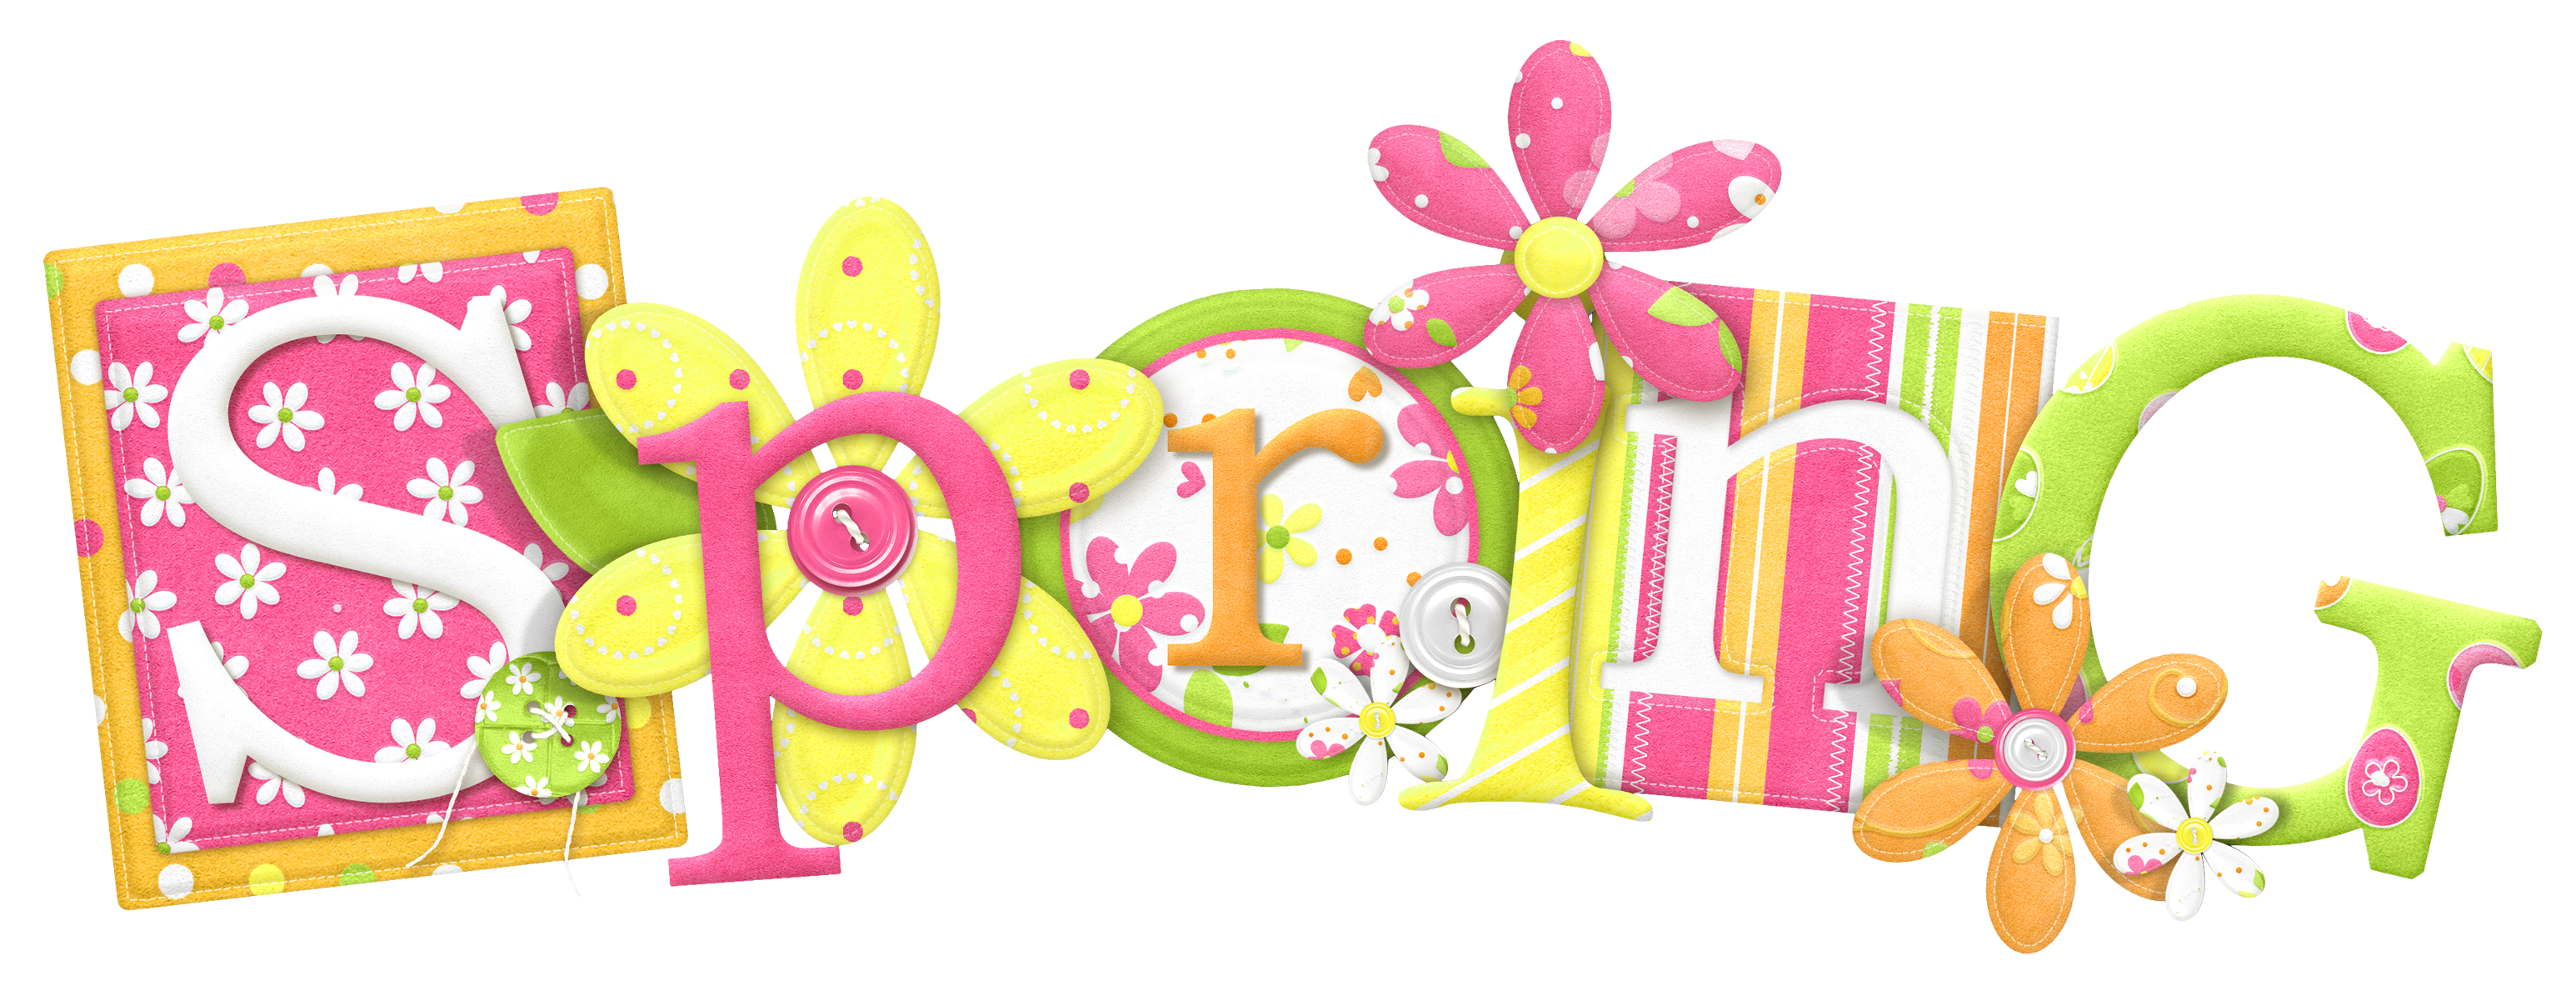 spring time clipart - photo #18